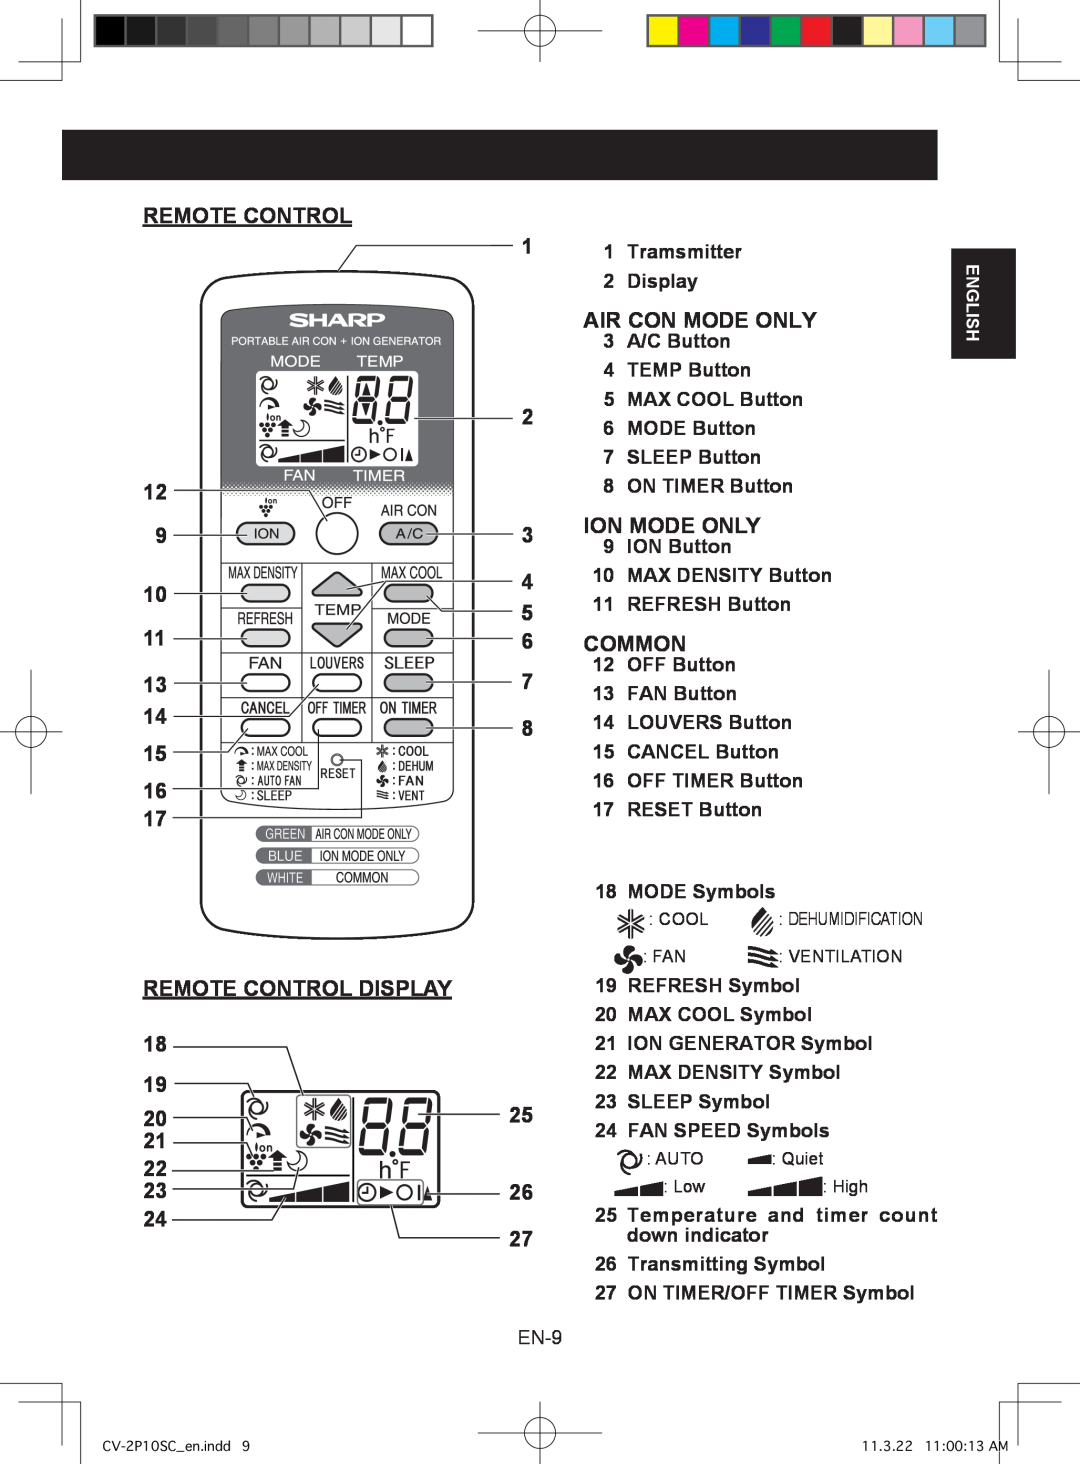 Sharp CV-2P10SC operation manual Air Con Mode Only, Ion Mode Only, Common, Remote Control Display 